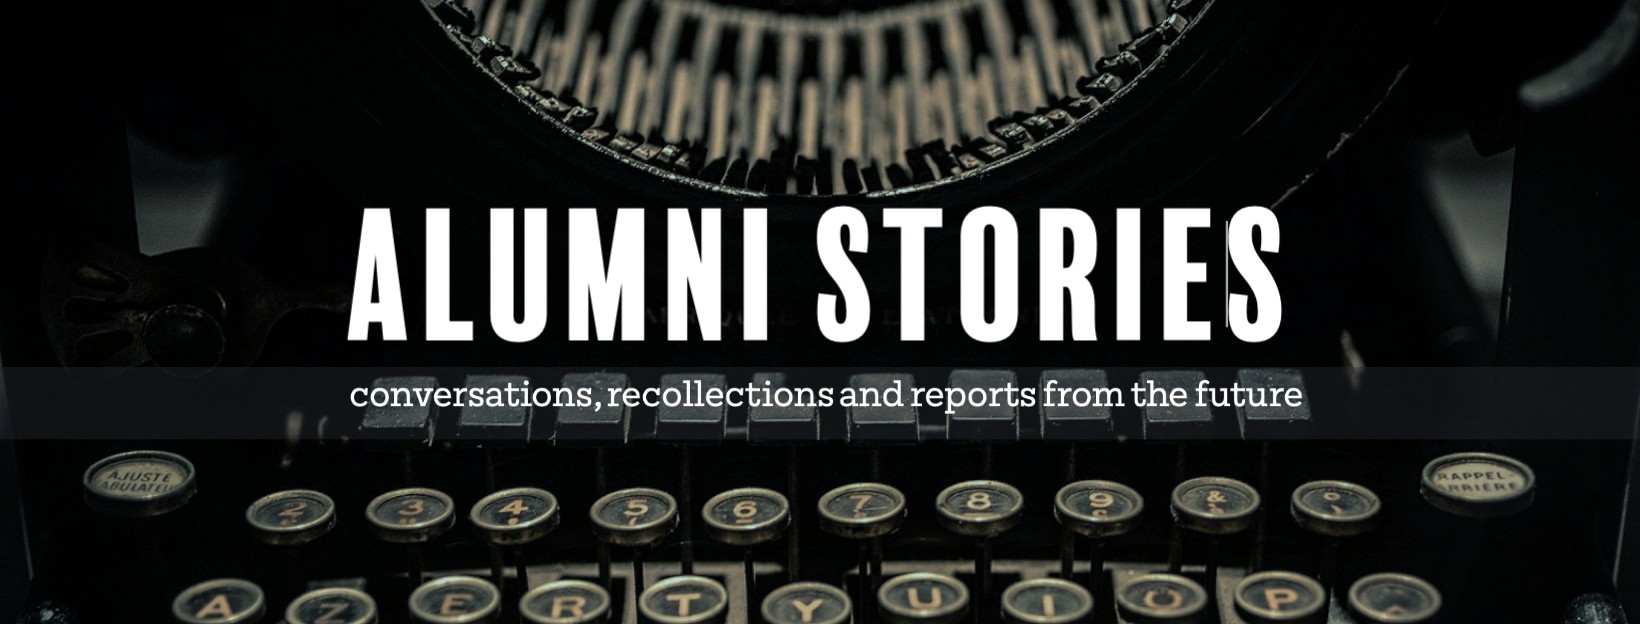 ALUMNI STORIES: conversations, recollections and reports from the future